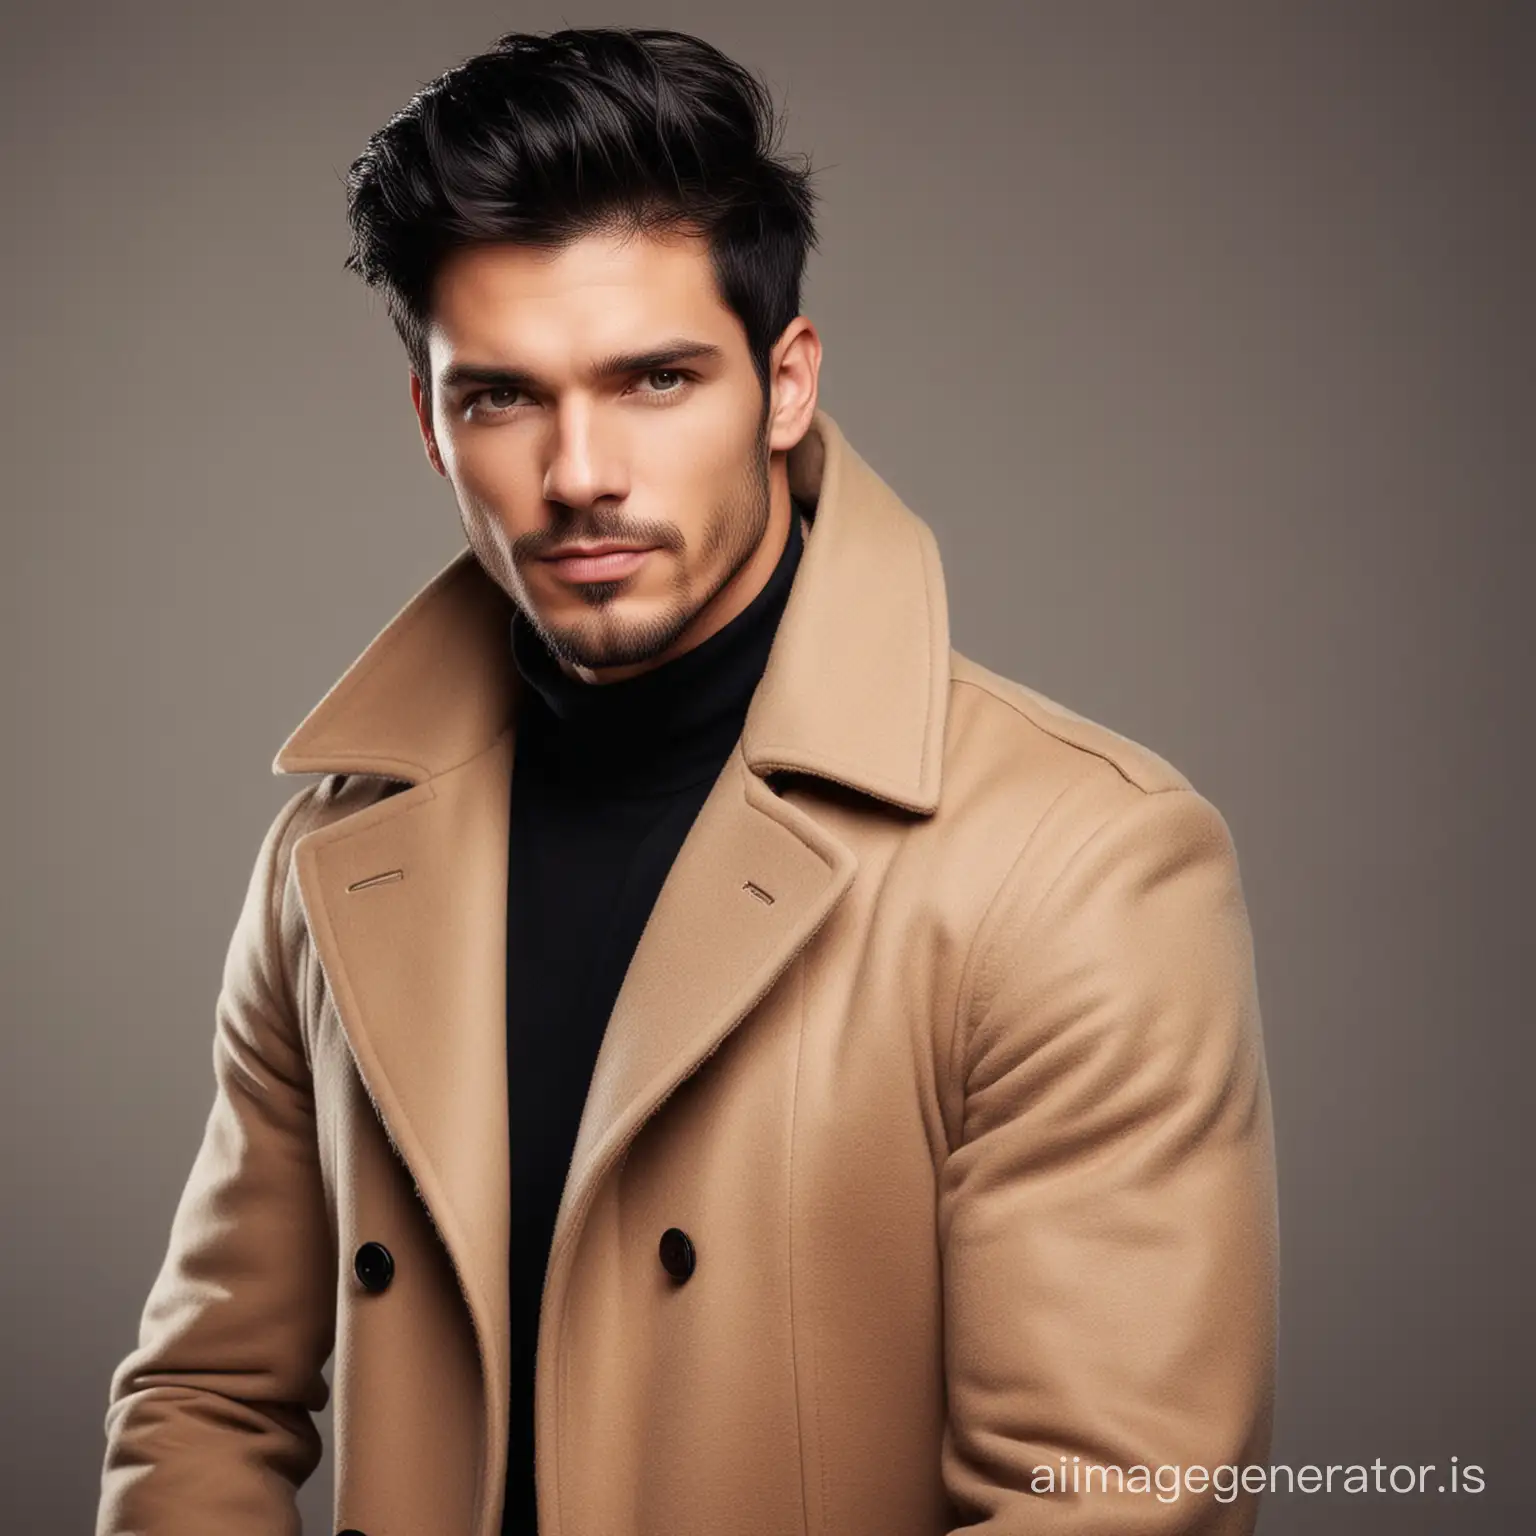 rich hansome man in coat with black hairs